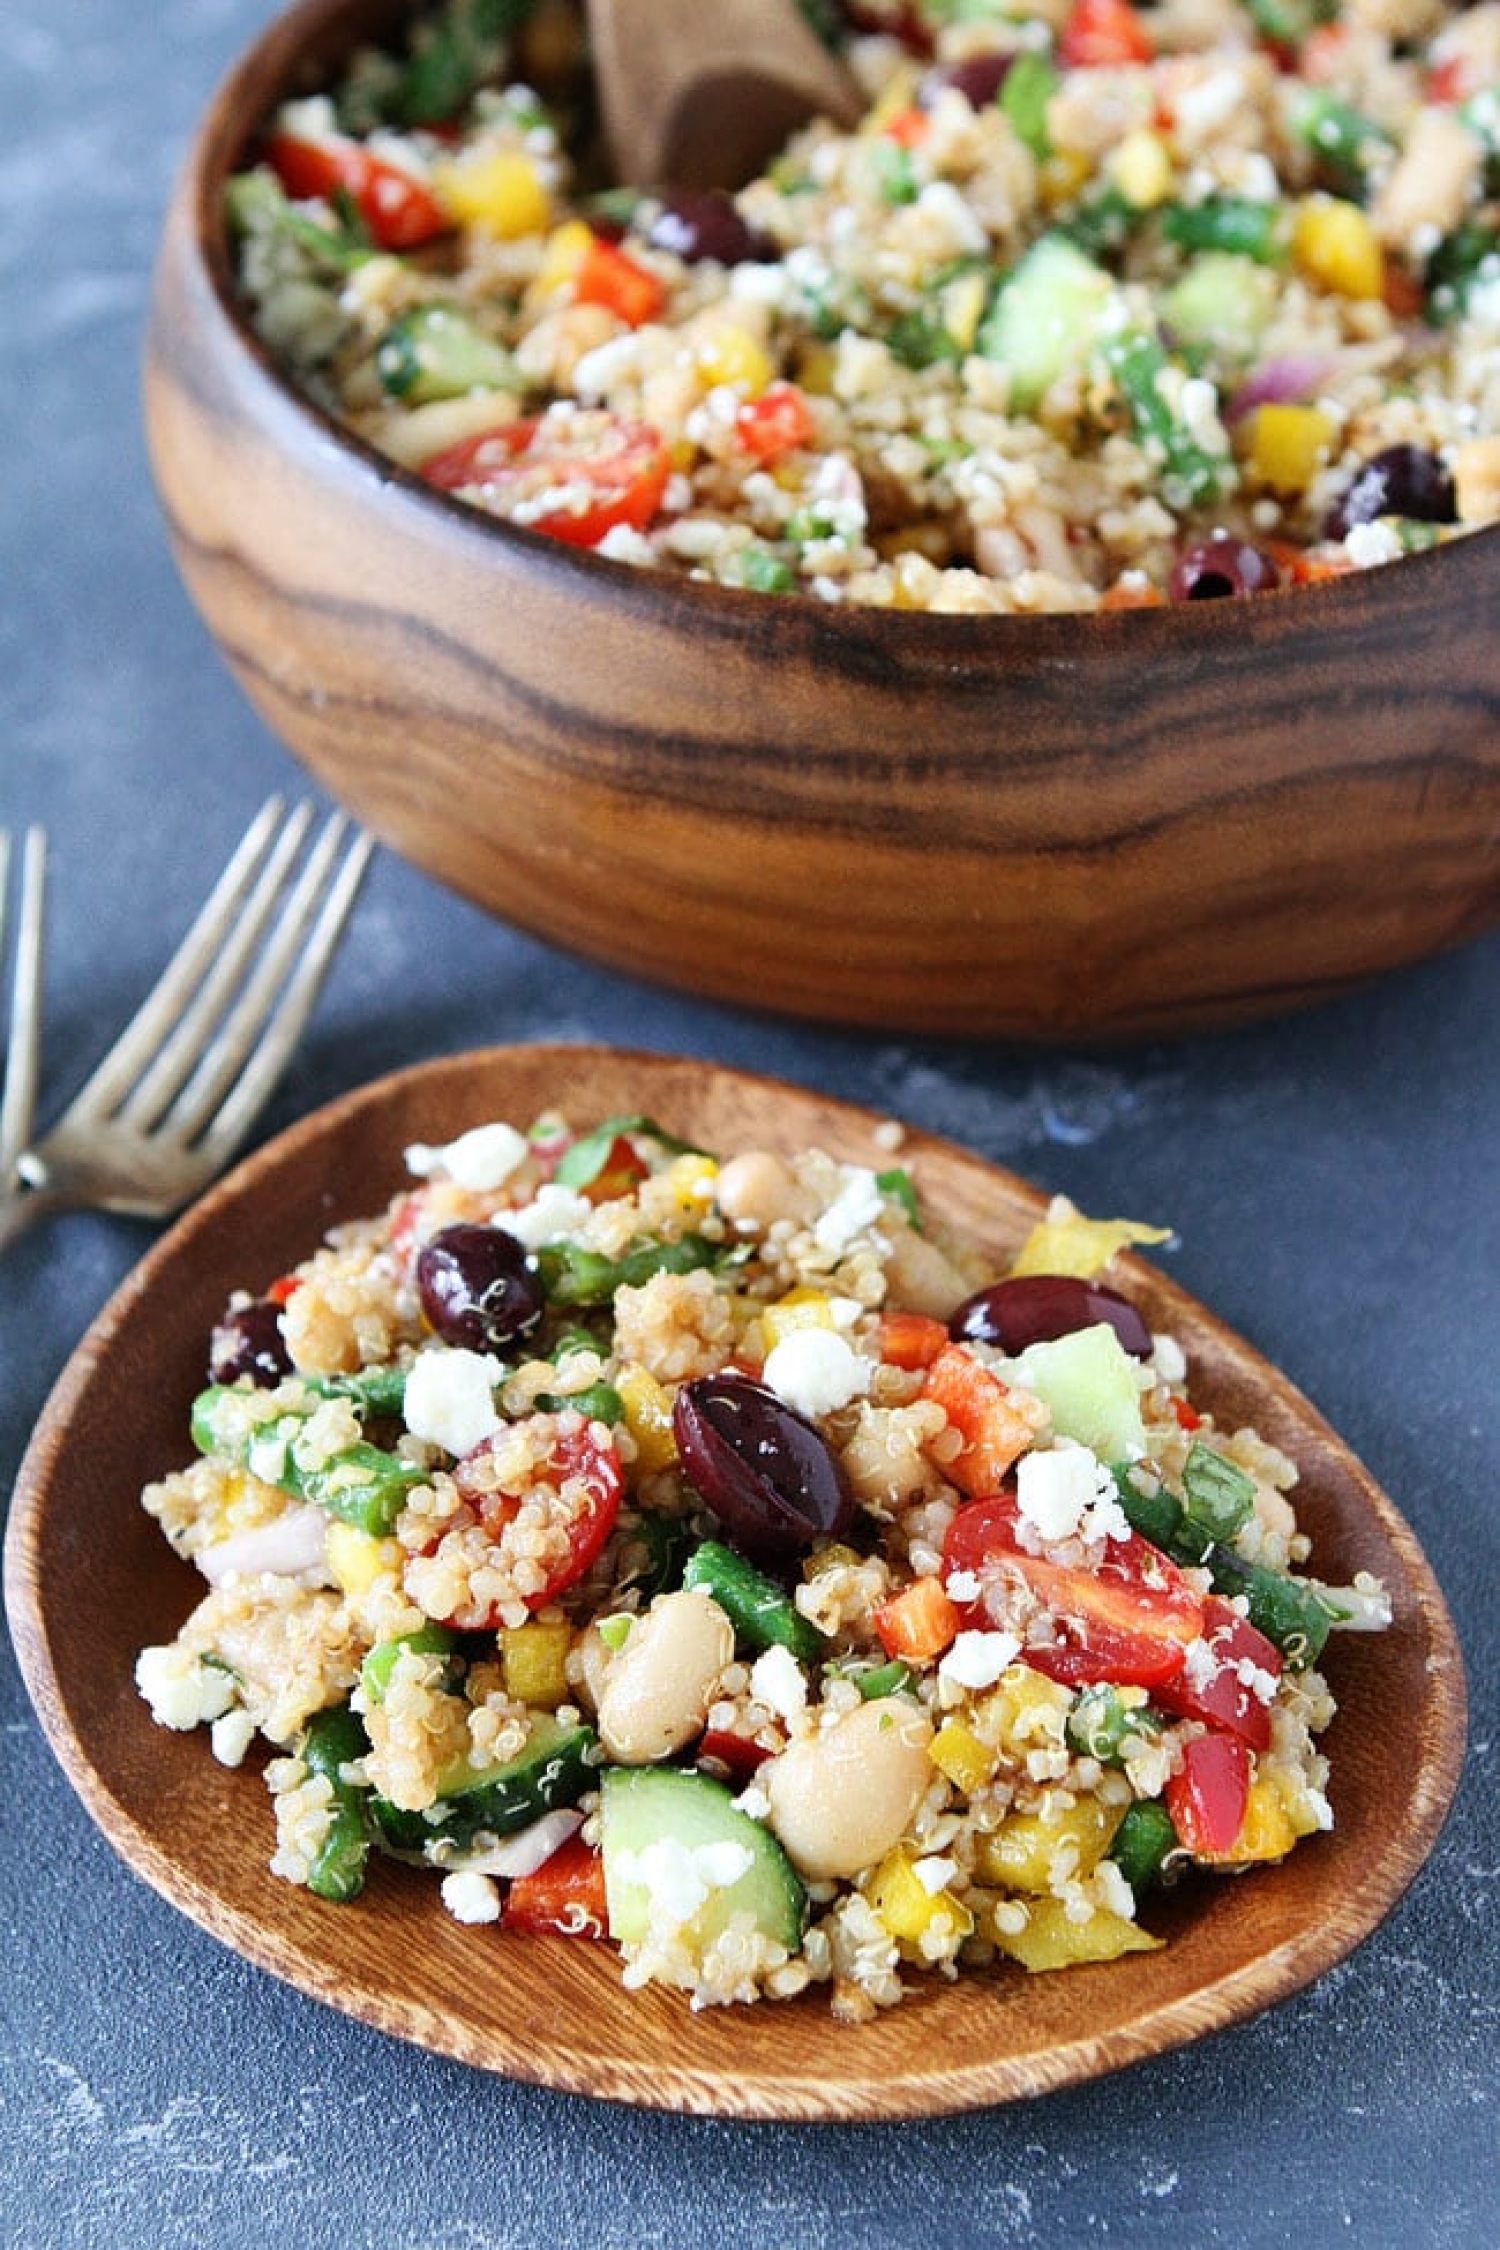 <p>The great thing about bean dishes is that they can be served either as a side or a main, and <a href="https://www.twopeasandtheirpod.com/mediterranean-three-bean-quinoa-salad/" rel="noopener">this recipe</a> is delicious proof of that. It's got green beans, white beans and garbanzo beans—the latter two being high in fiber and protein, plus quinoa, fresh veggies and tangy feta cheese.</p>